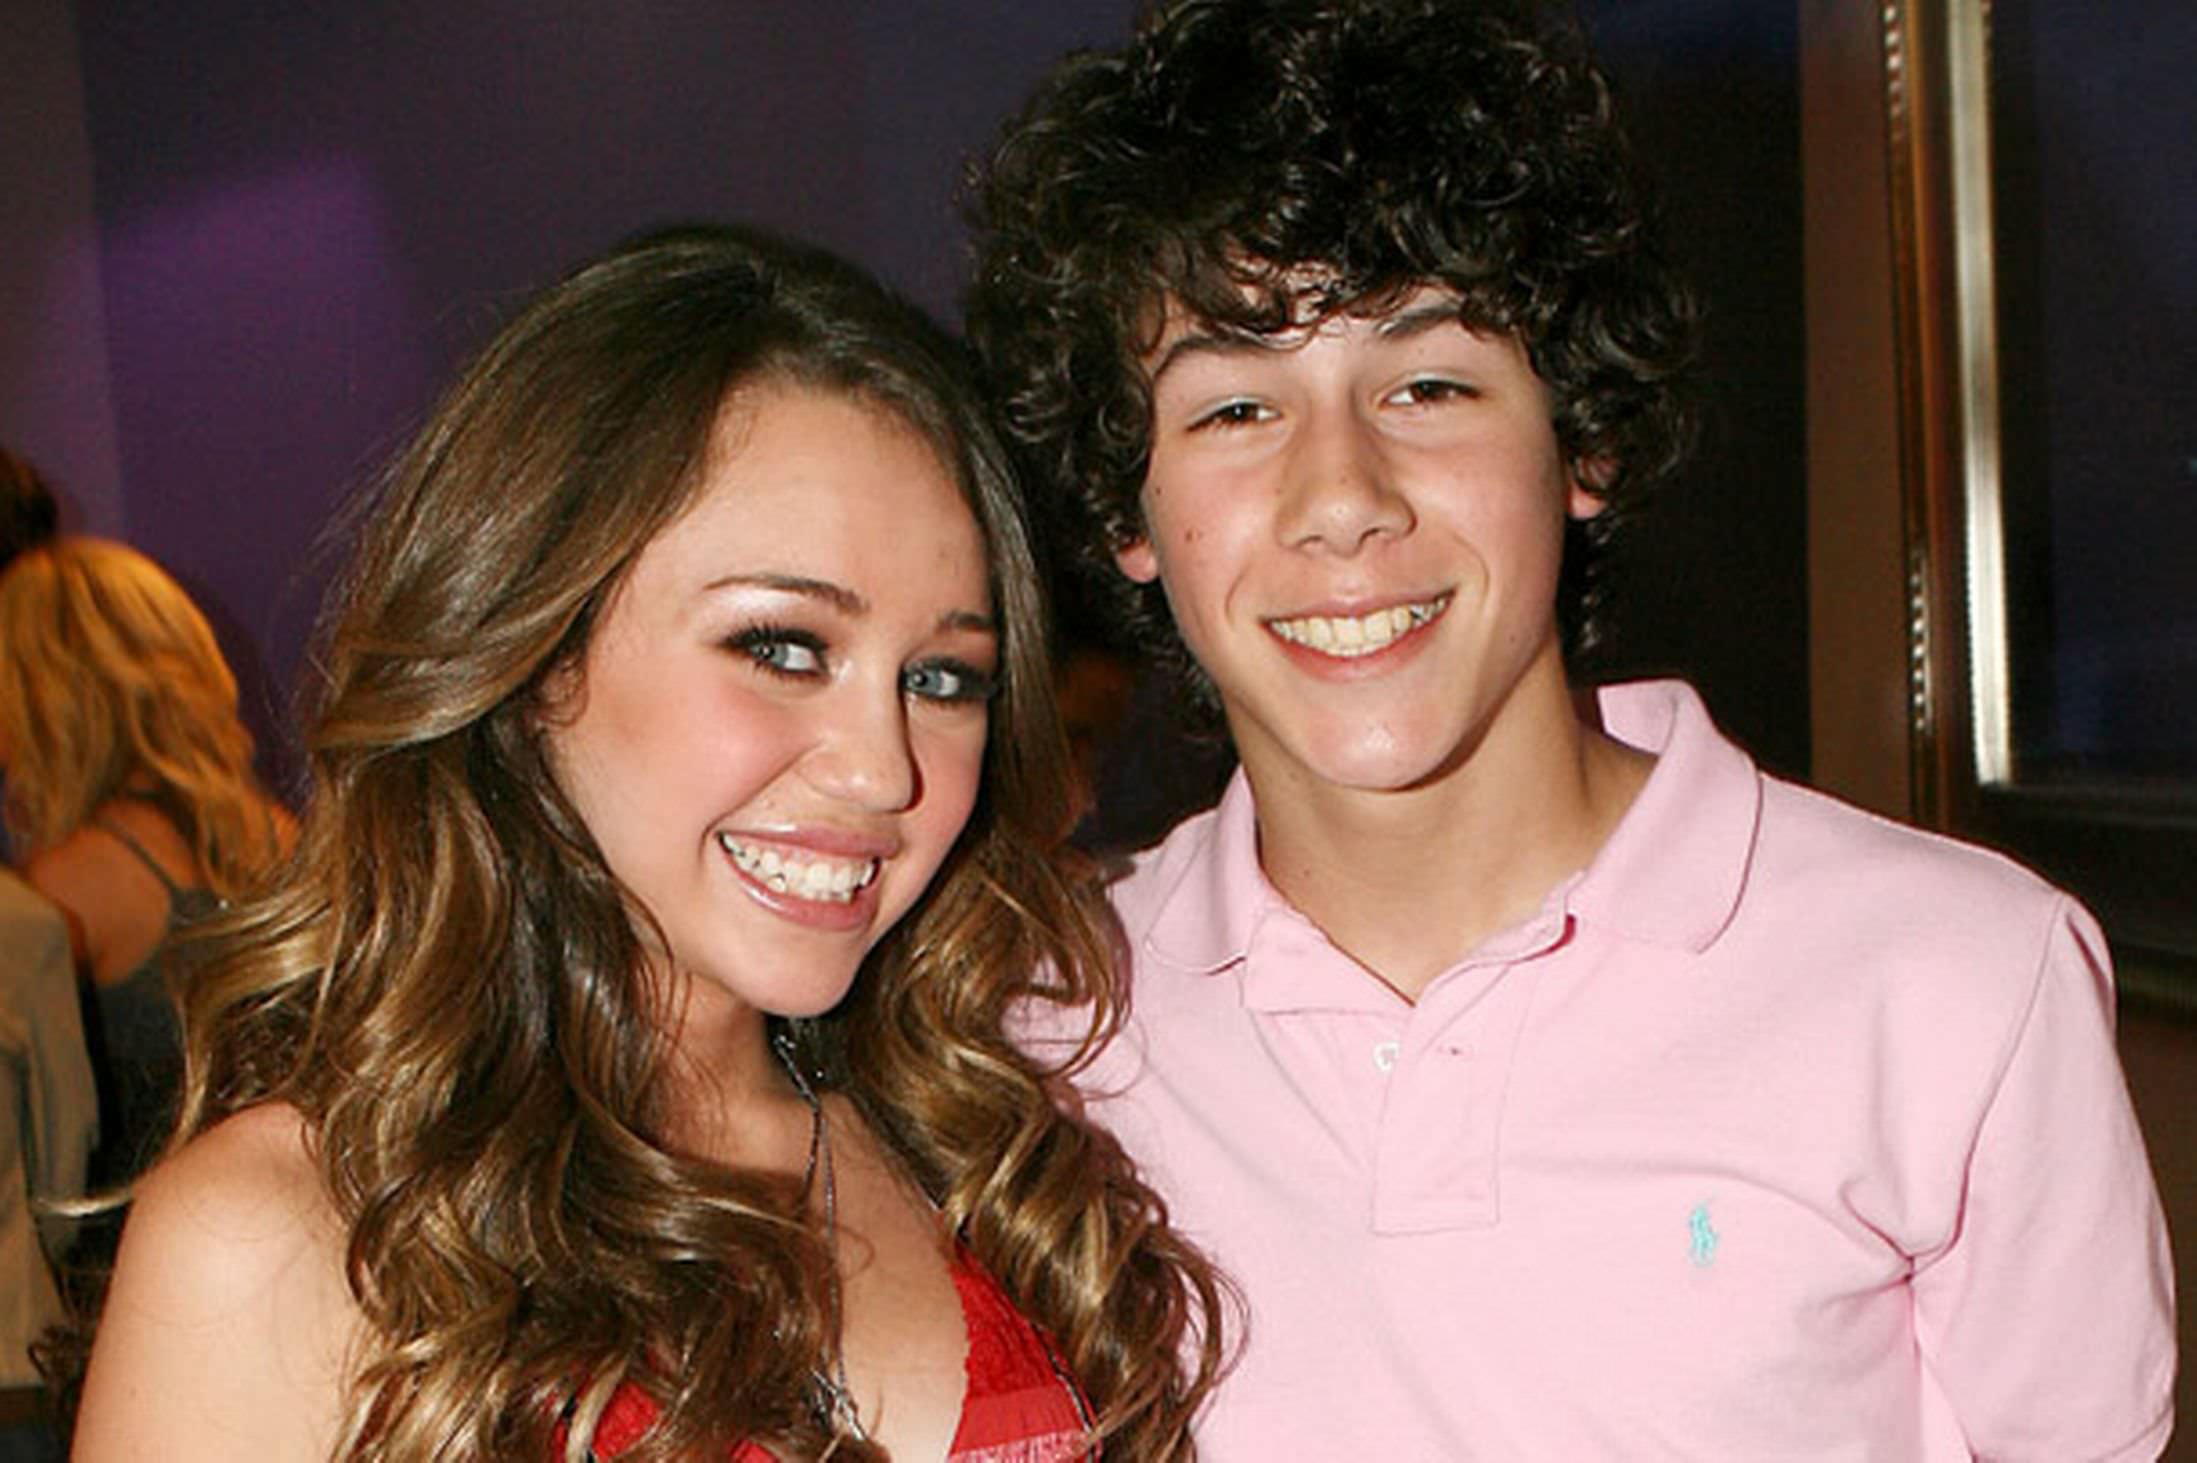 7 Old School Celebrity Couples We Totally Forgot About